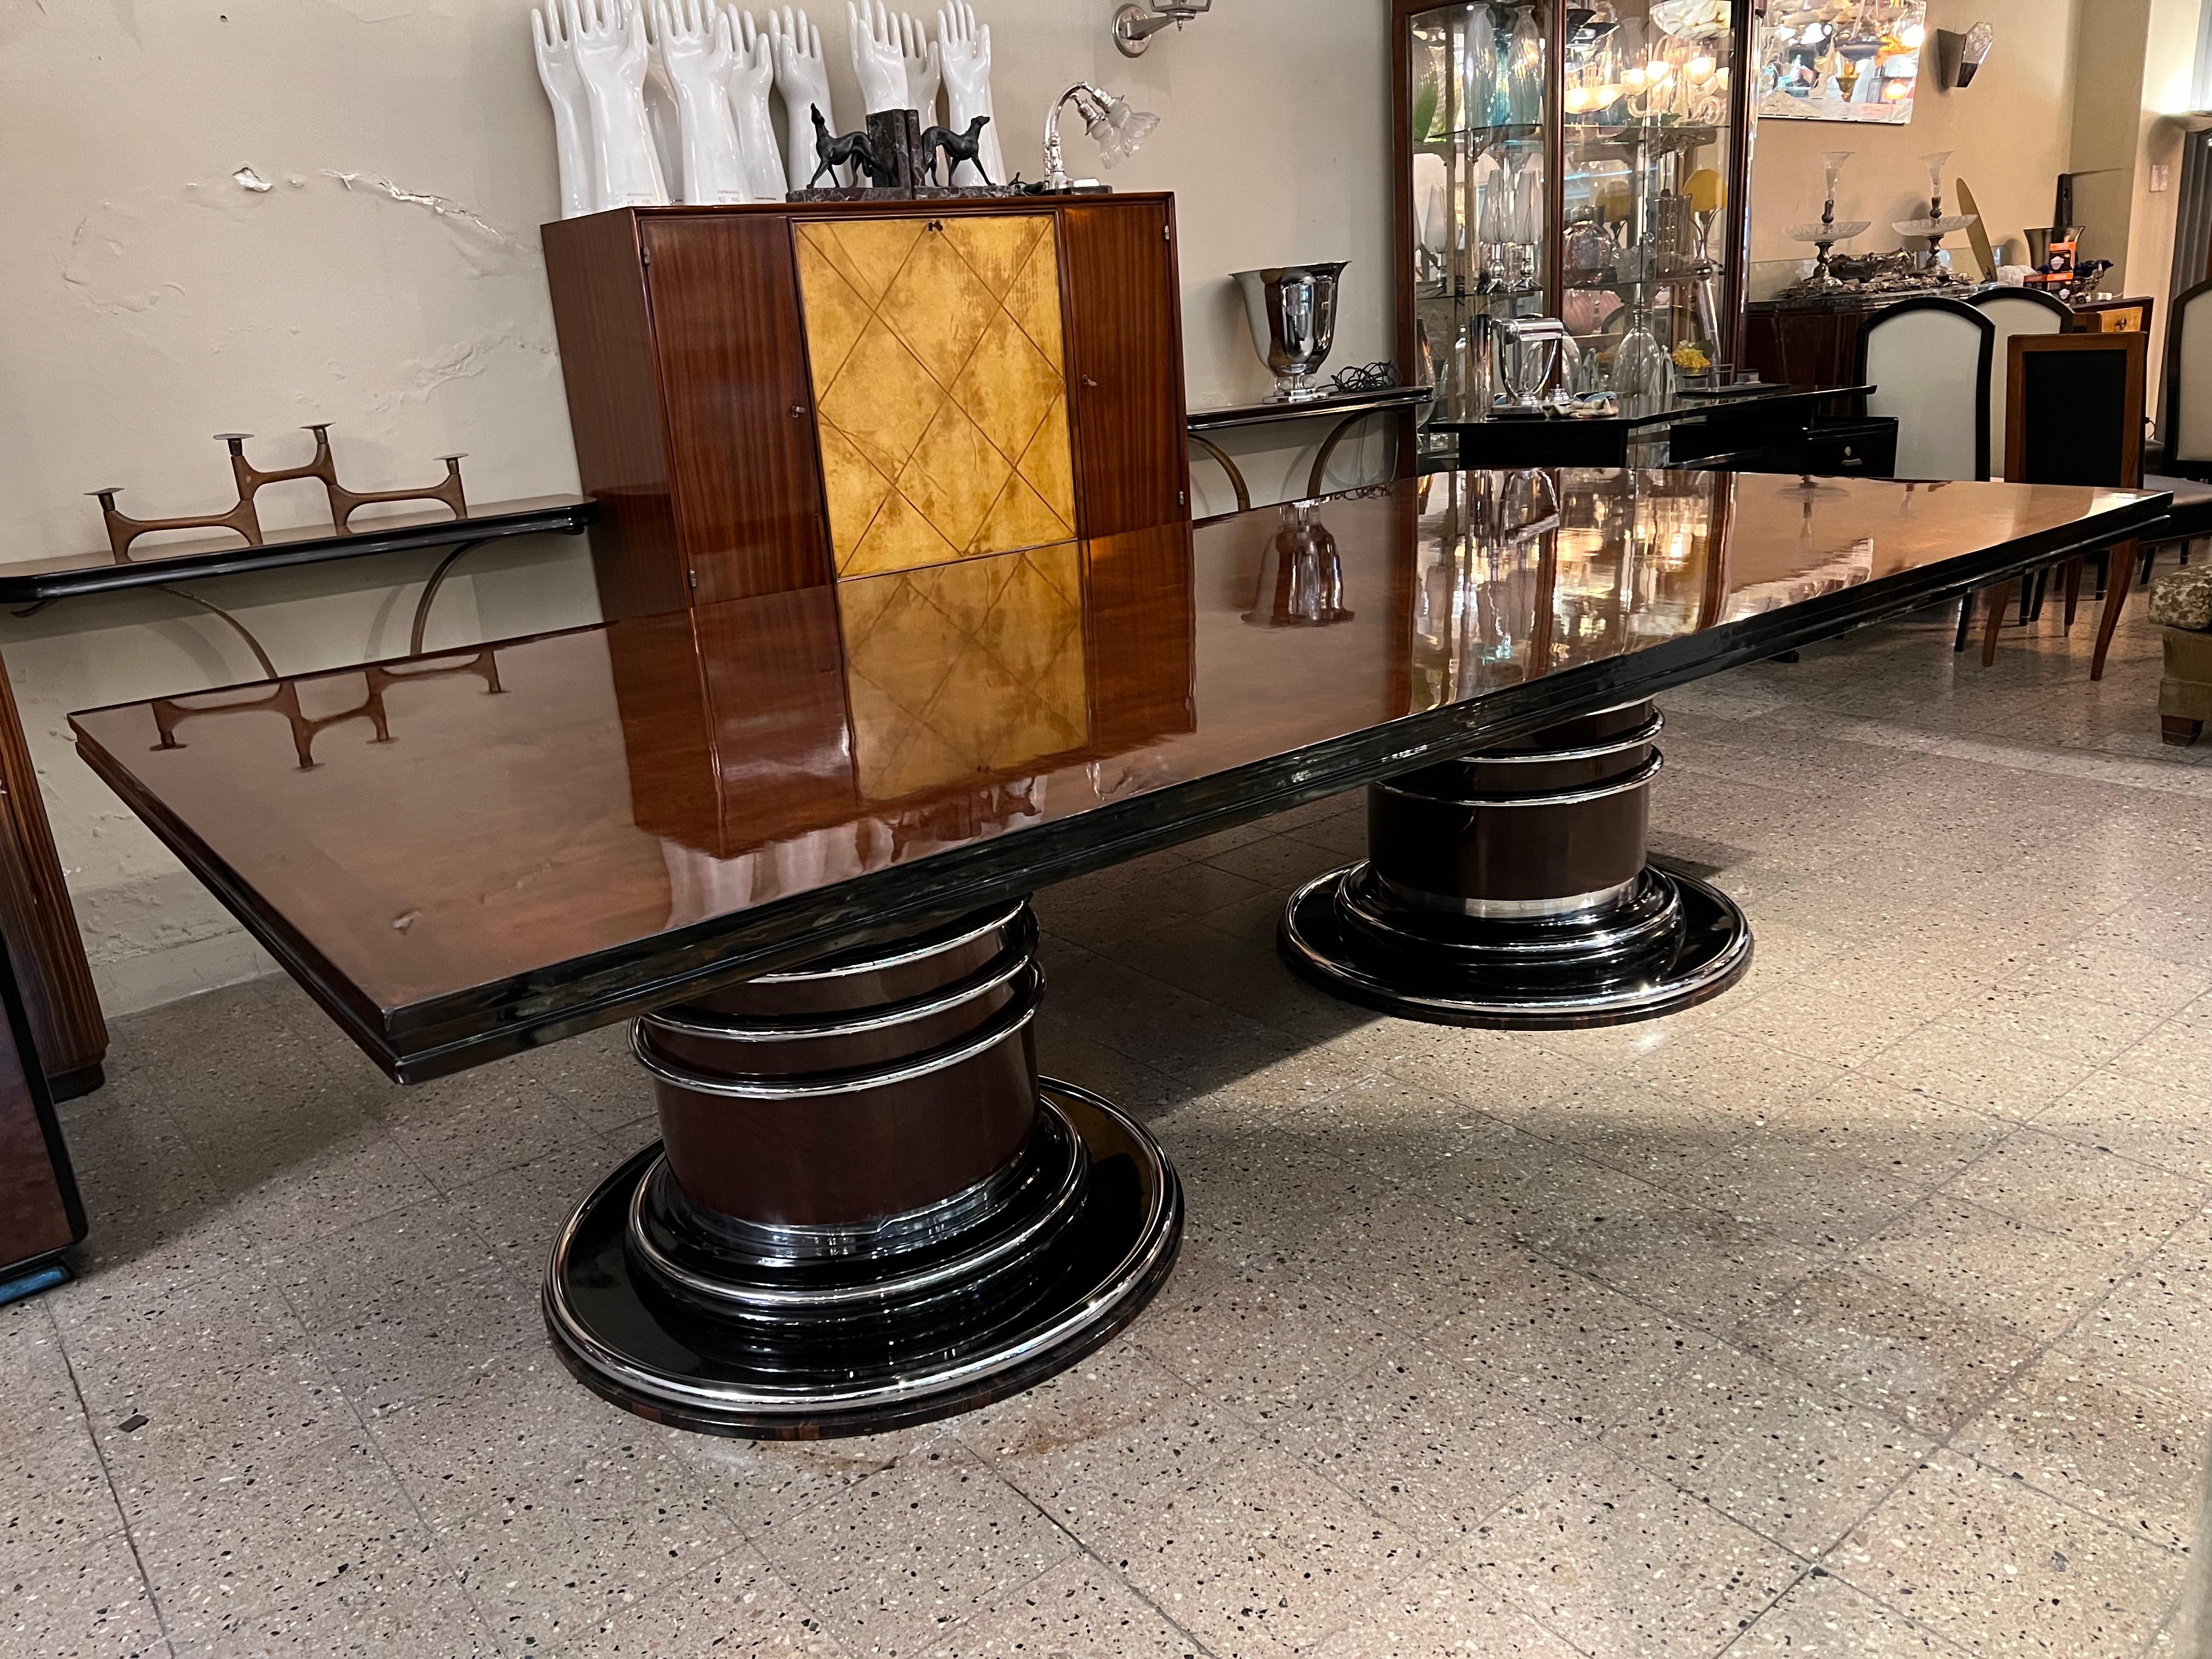 Amaizing Art Deco Table, '12 Persons', 1920, France in Chrome Steel and Wood For Sale 11